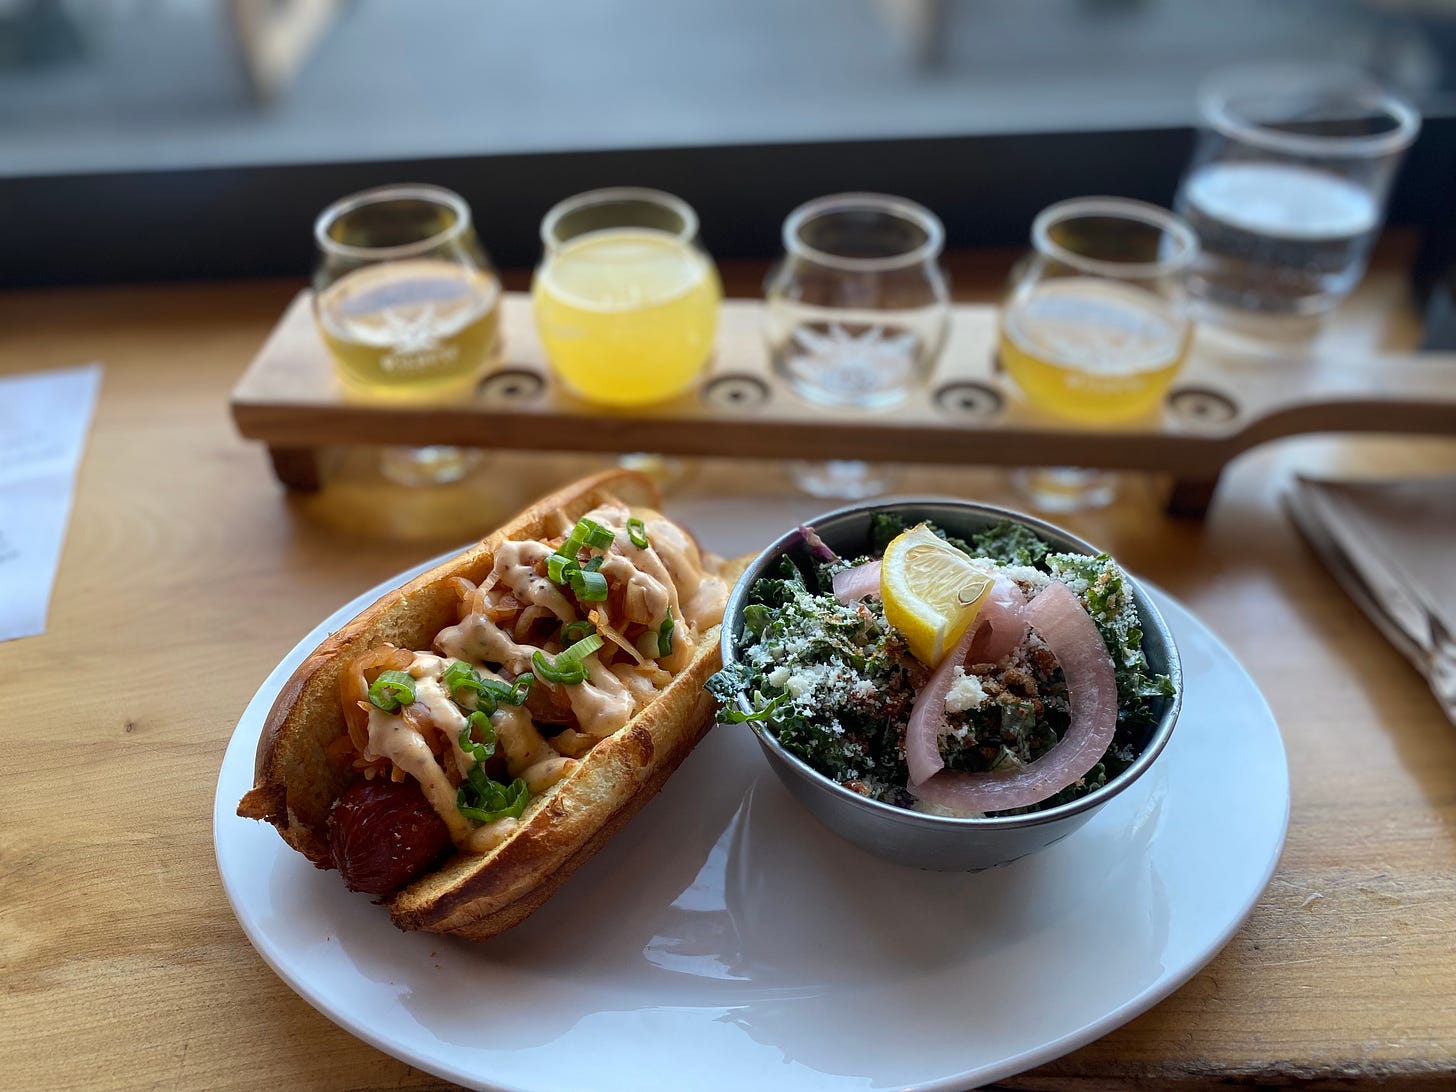 A hot dog with kimchi, spicy mayo, and green onions on a white plate next to a small metal bowl of kale caesar salad with pickled onions, dusted with breadcrumbs and parmesan and garnished with lemon. In the background is a flight of beer in a wood paddle.